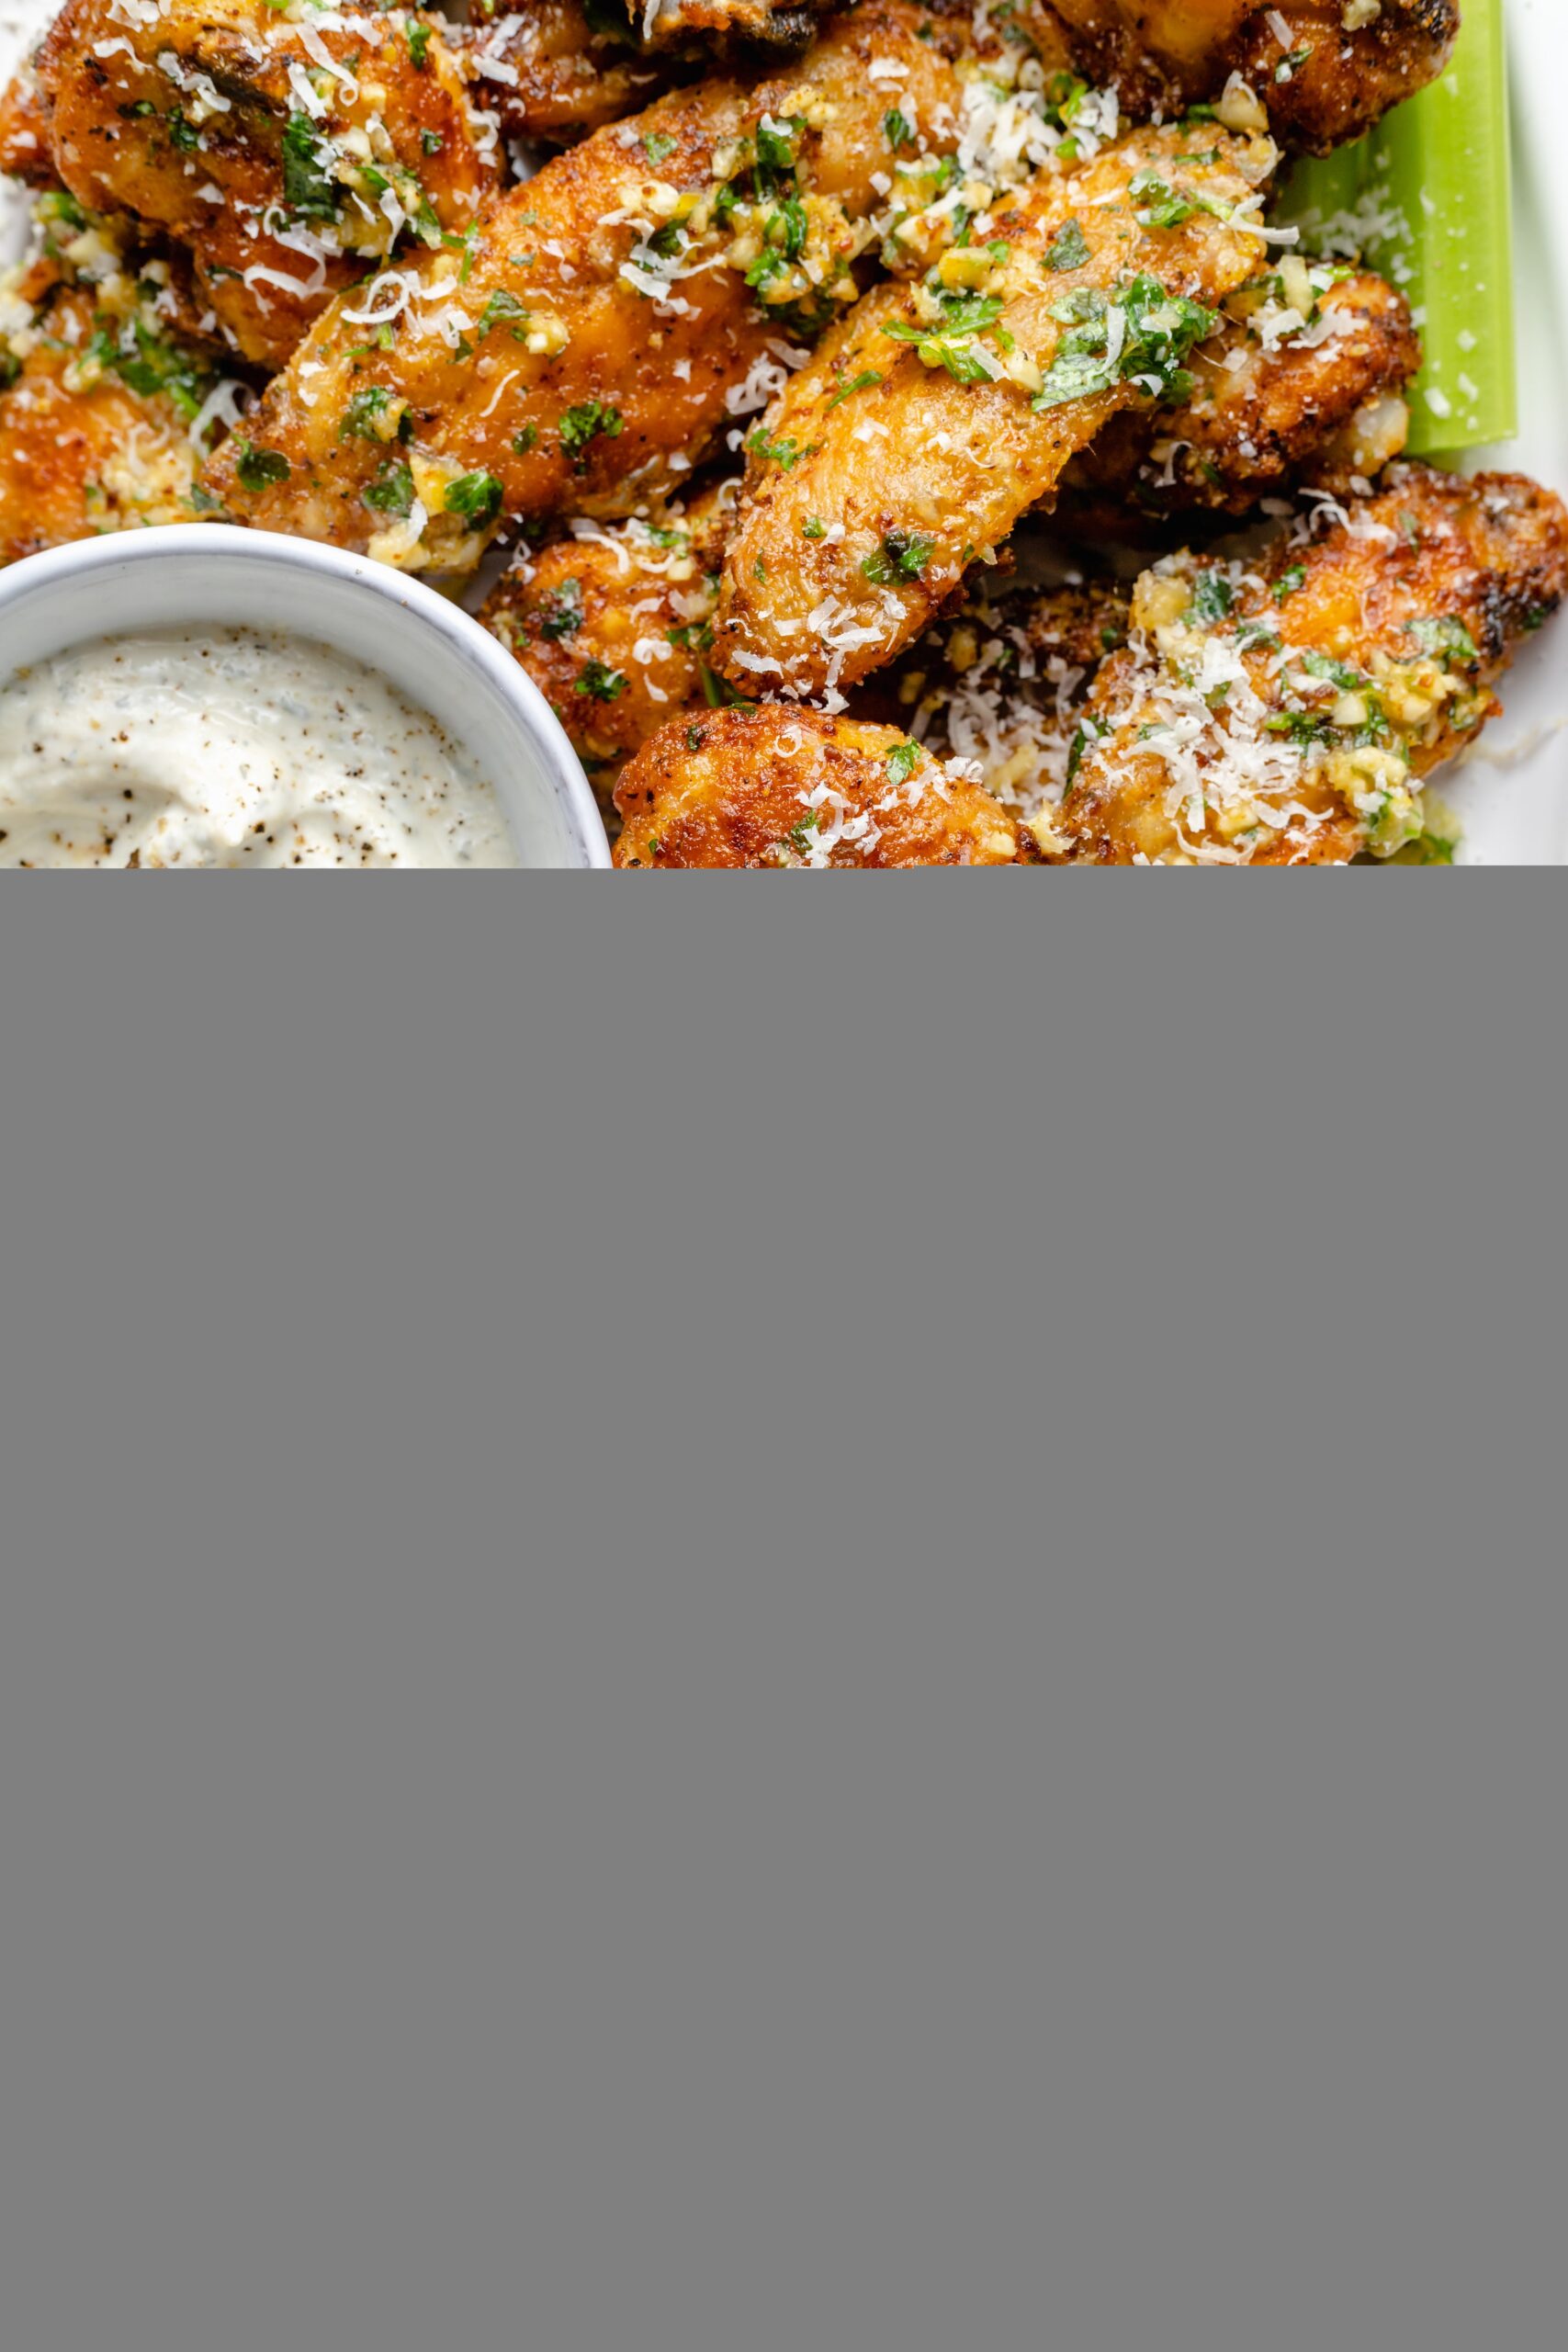 https://allthehealthythings.com/wp-content/uploads/2022/02/Garlic-Parmesan-Chicken-Wings-6-scaled.jpg